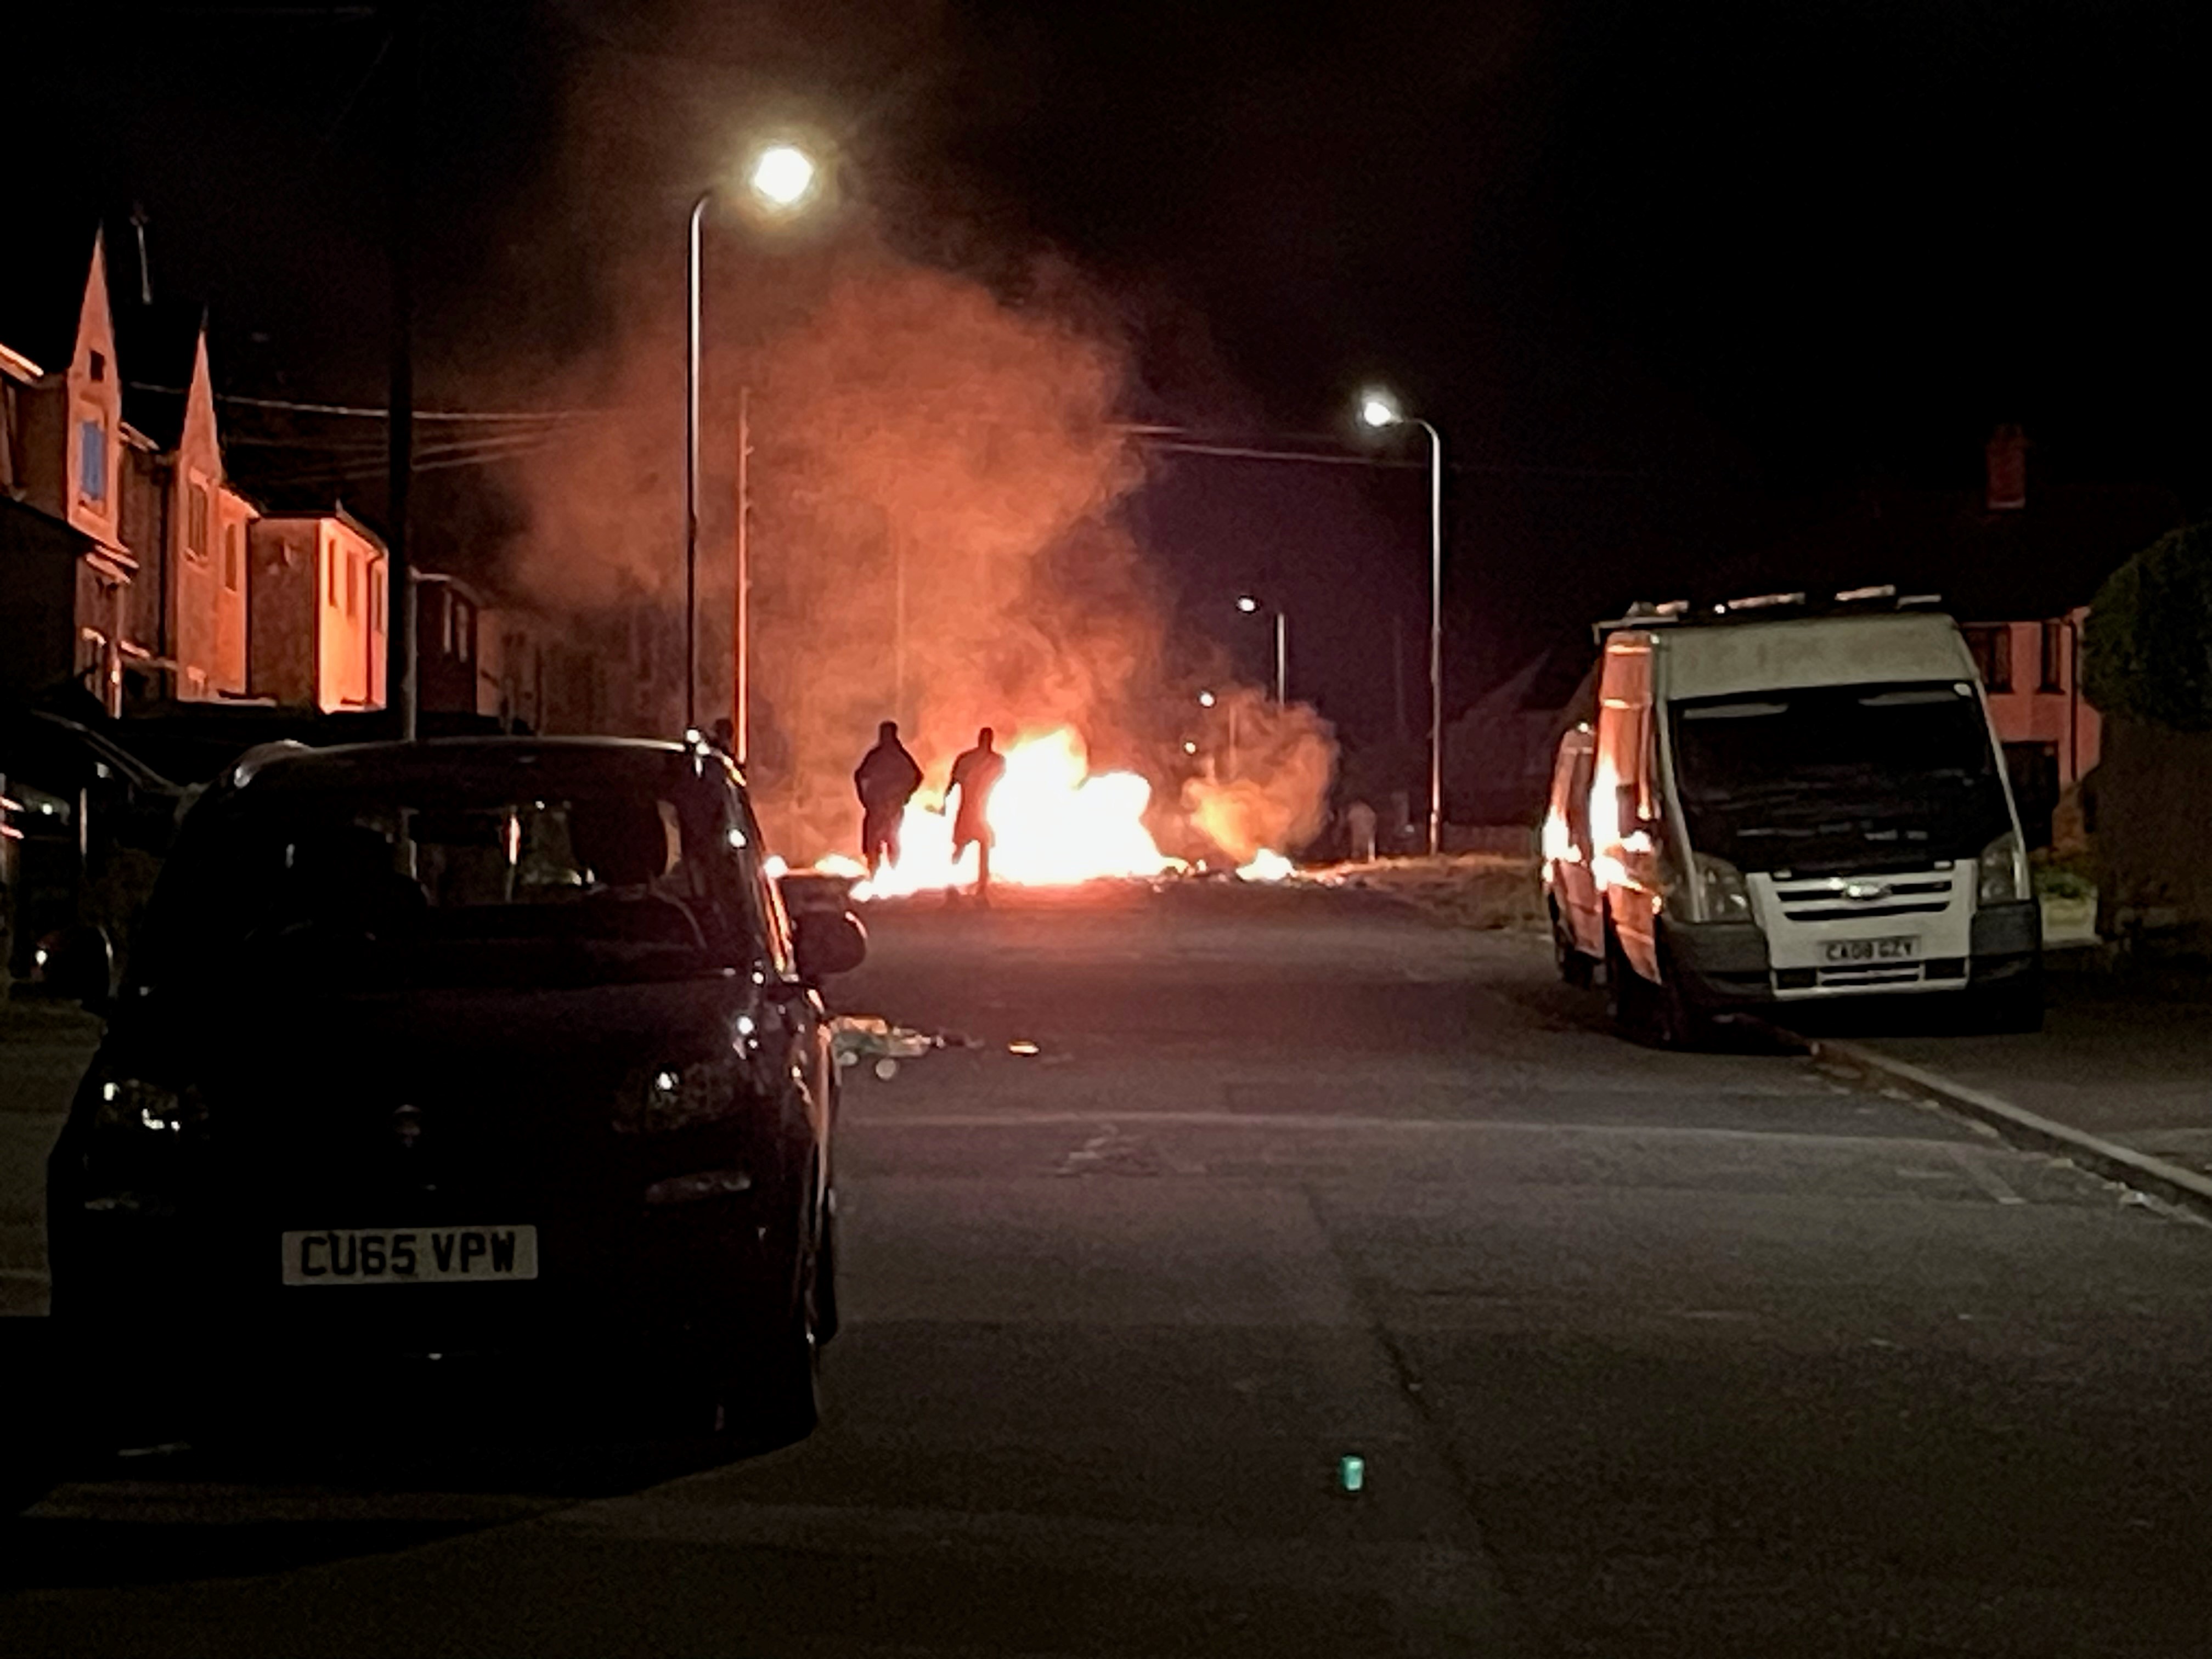 Rioting in the Ely area of Cardiff